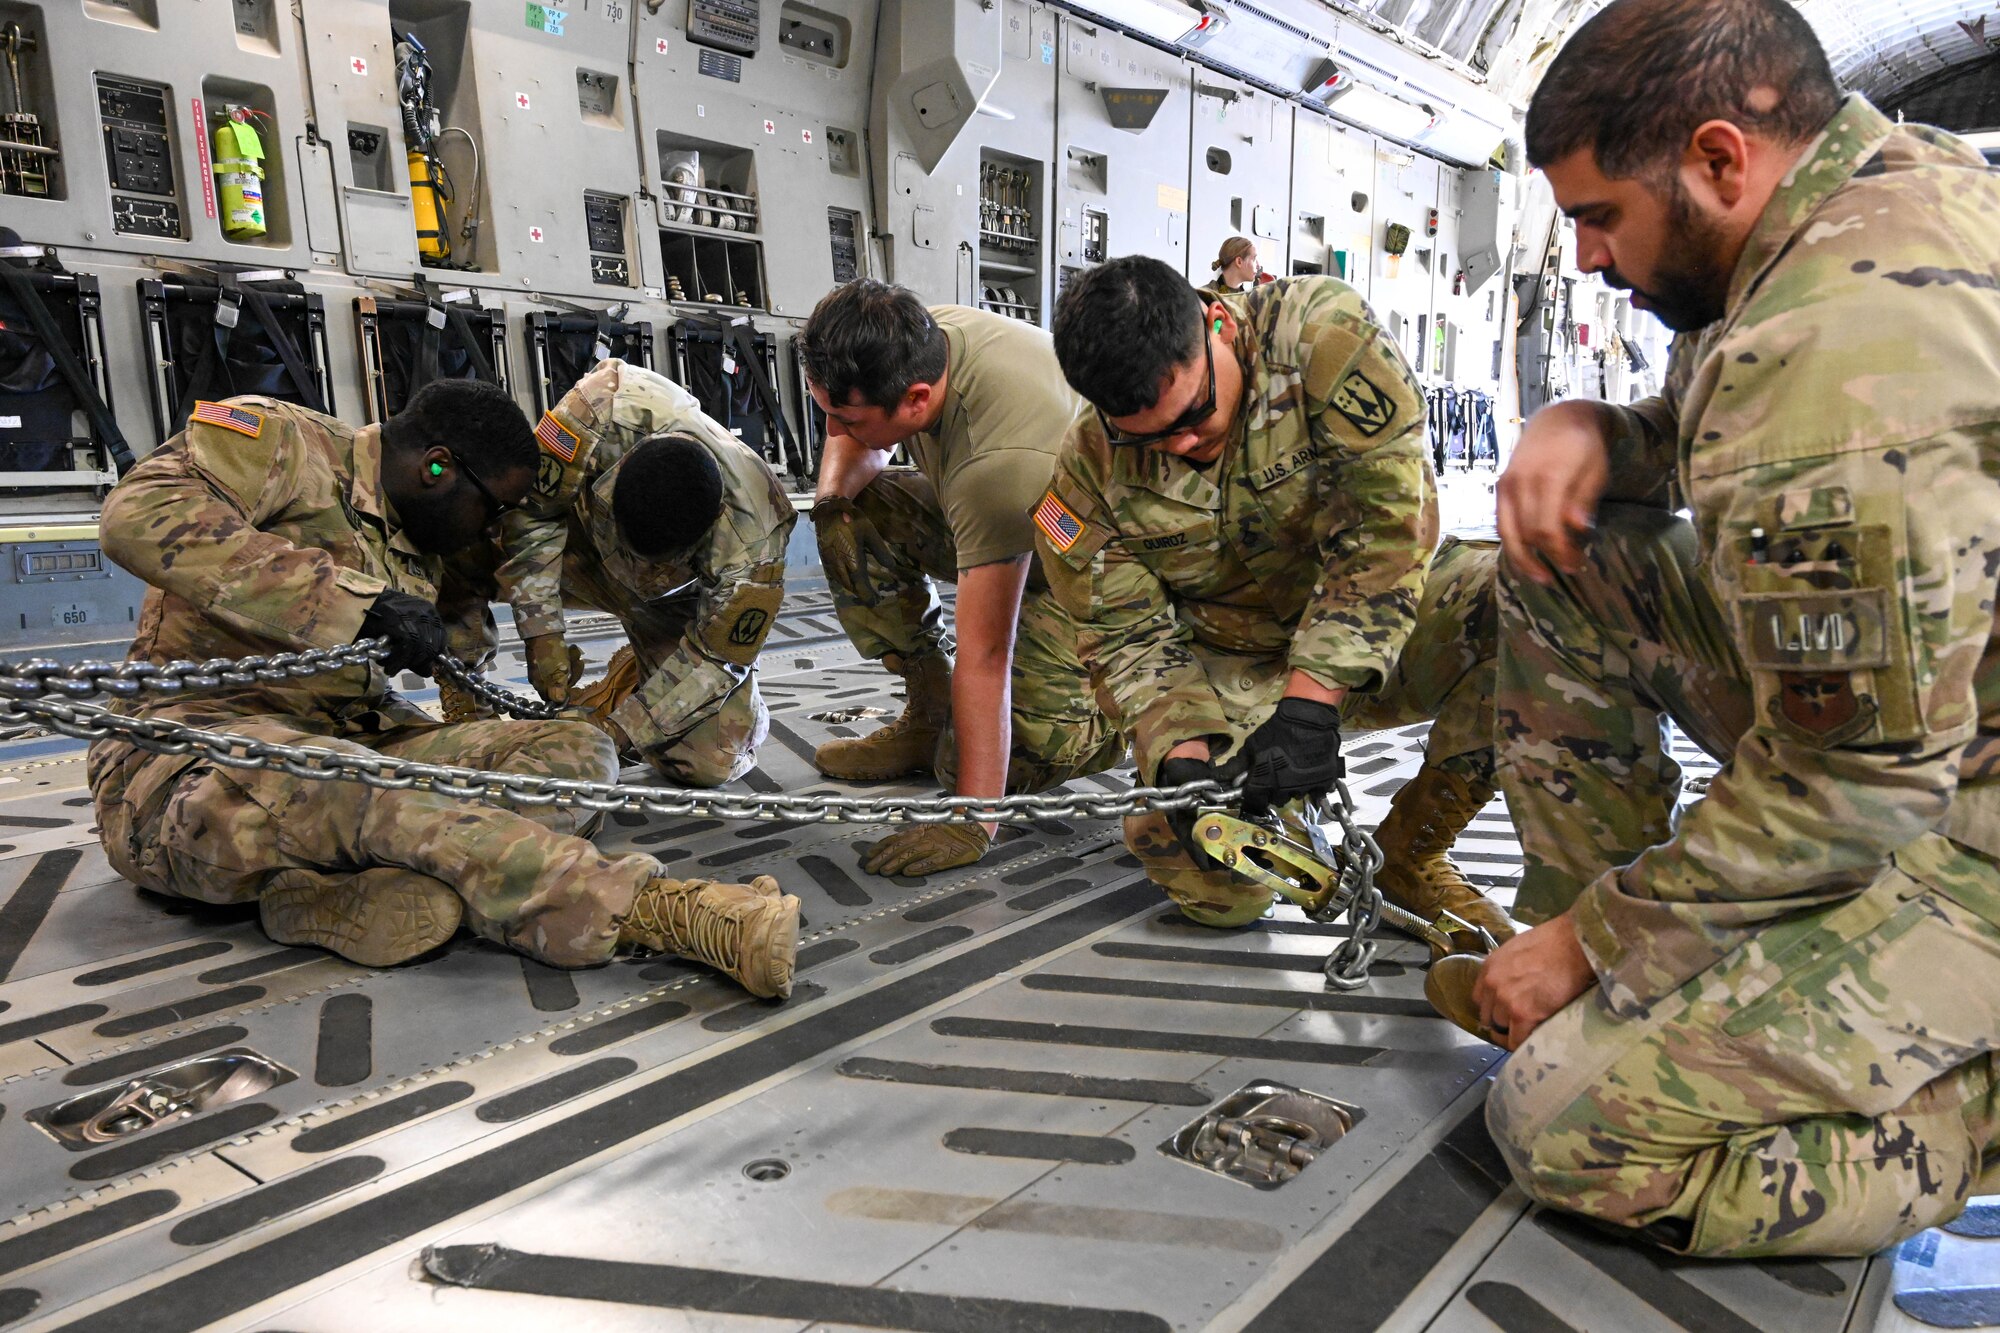 U.S. Soldiers complete vehicle tiedown operations on C-17 Globemaster III under the supervision of U.S. Airmen from the 97th Air Mobility Wing at Altus Air Force Base, Oklahoma, April 19, 2023. In conjunction with the loadmasters, the Soldiers were able to complete loading and tie down operations. (U.S. Air Force photo by Senior Airman Trenton Jancze)